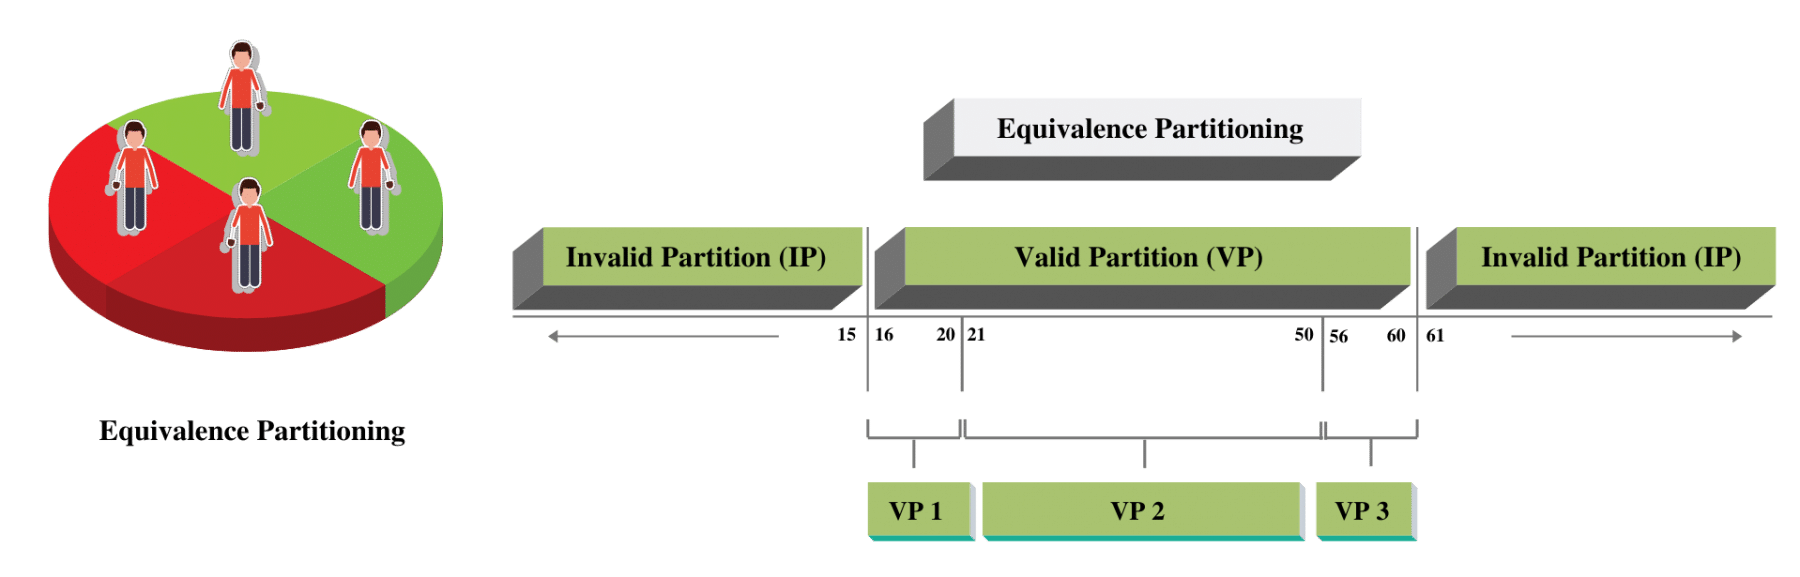 Equivalence Partitioning Technique Example